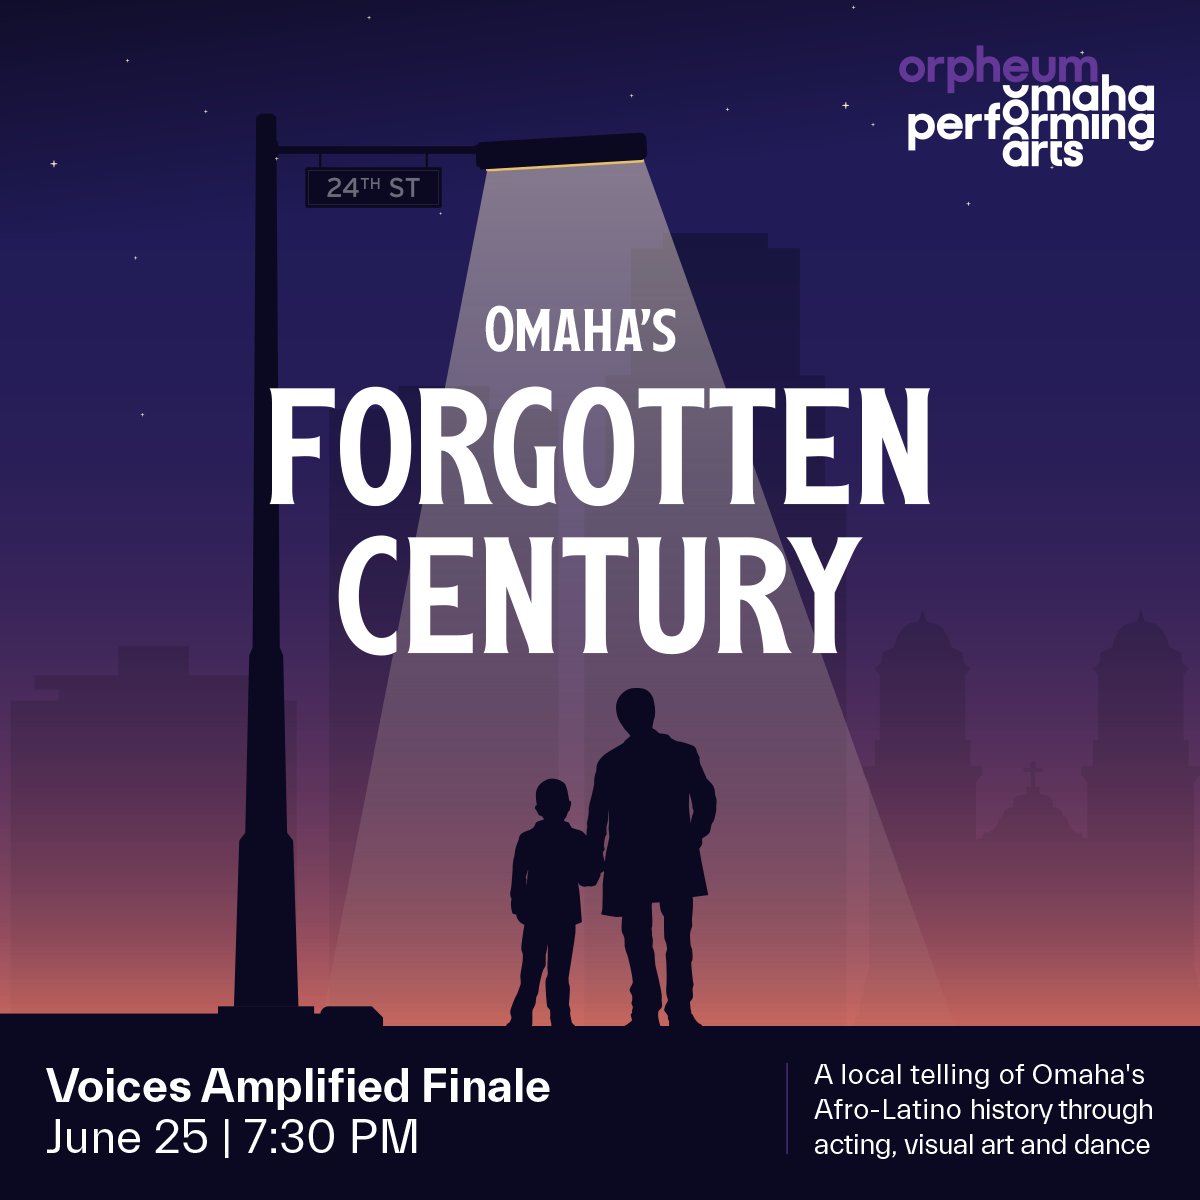 “Omaha’s Forgotten Century”—a free performance at the Orpheum Theater at 7:30 p.m. on June 25—celebrates the rich cultures and histories of the Black and Latino communities in Omaha. tinyurl.com/3cr9ctxk